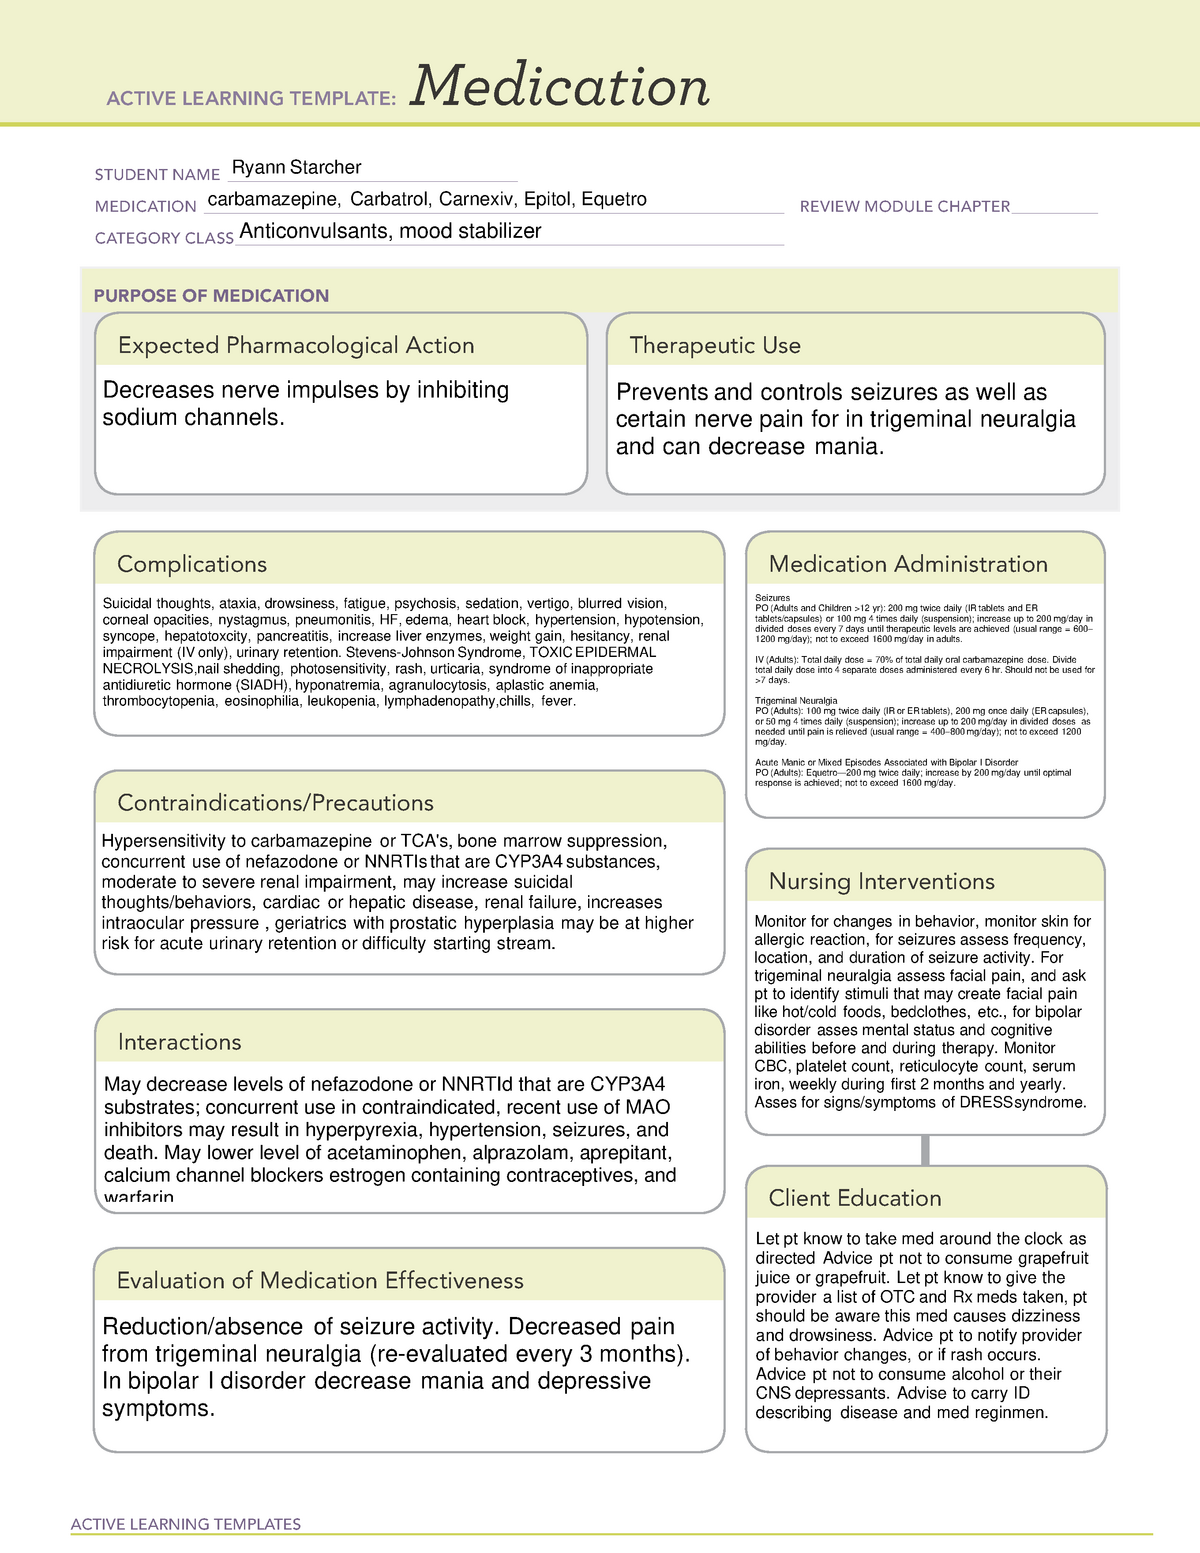 Carbamazepine Medication Template for NCLEX based medication